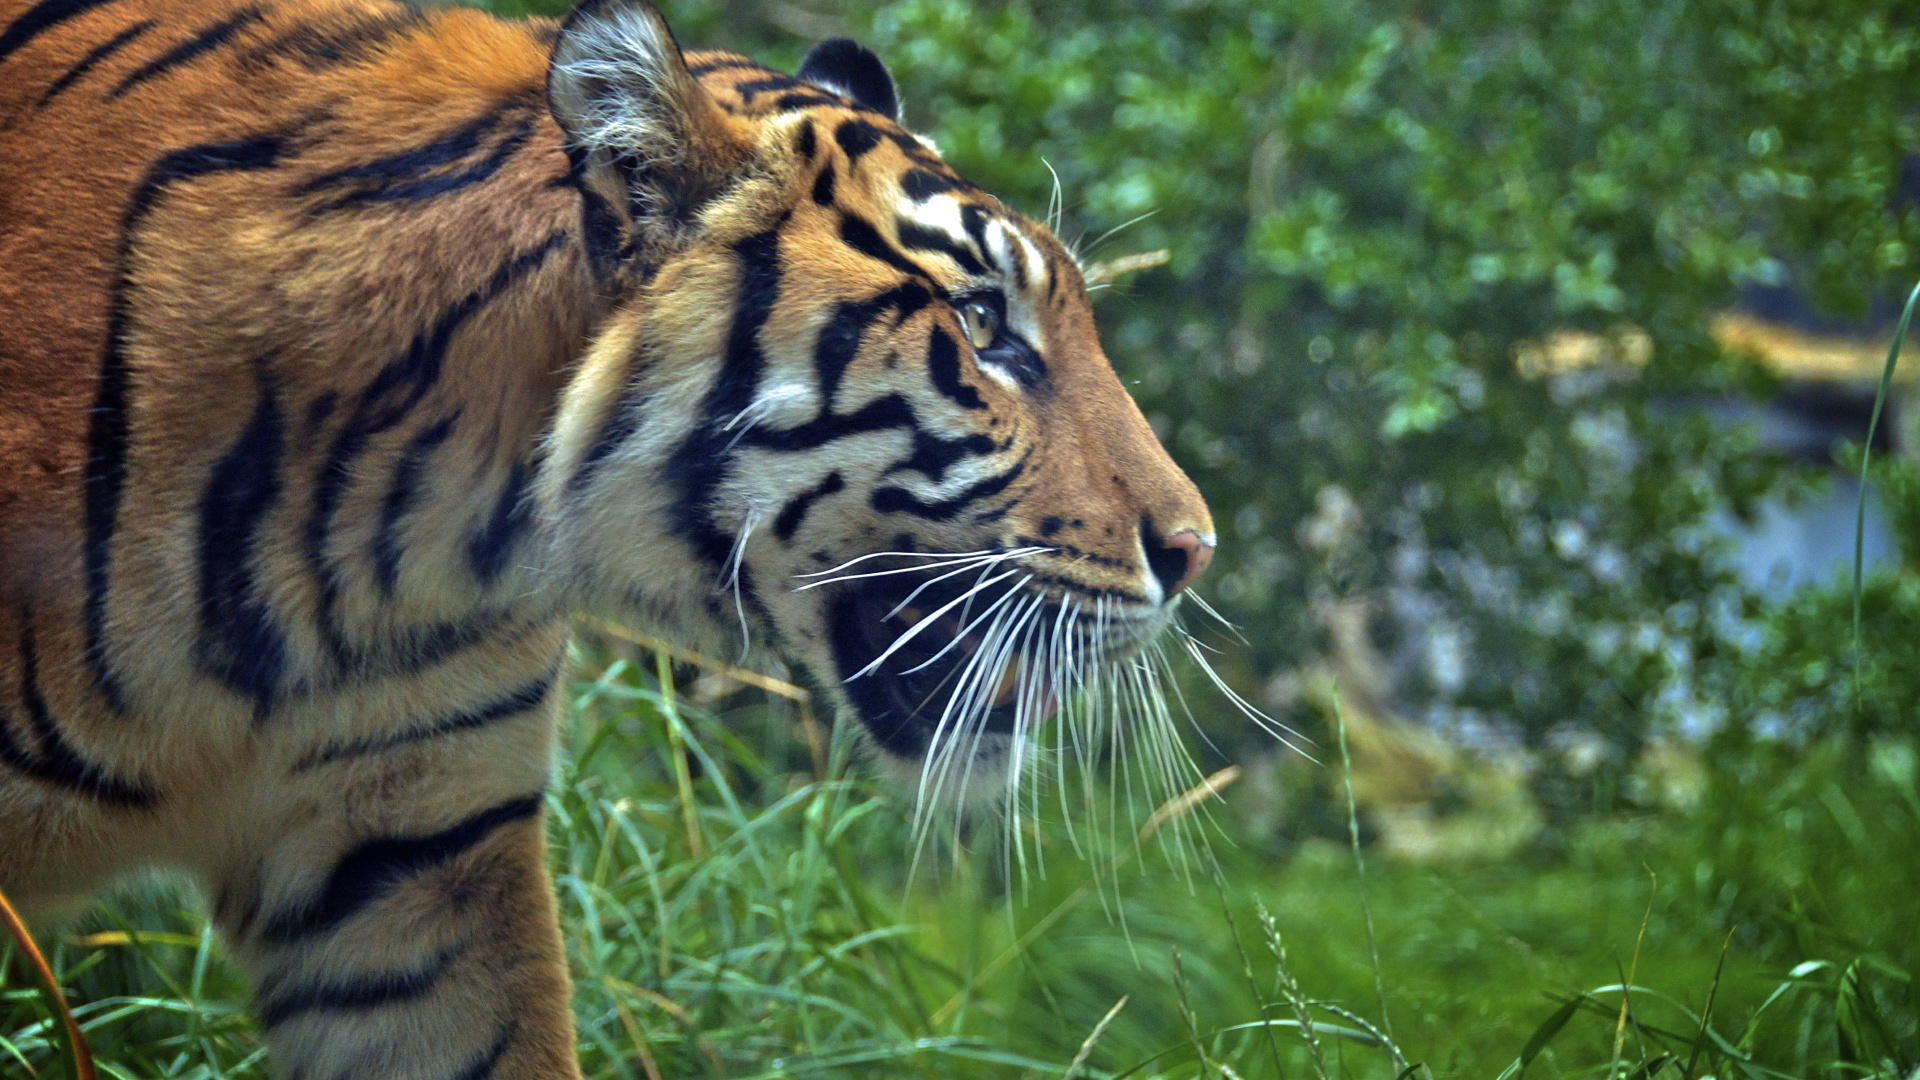 Brown and Black Tiger on Green Grass During Daytime. Wallpaper in 1920x1080 Resolution